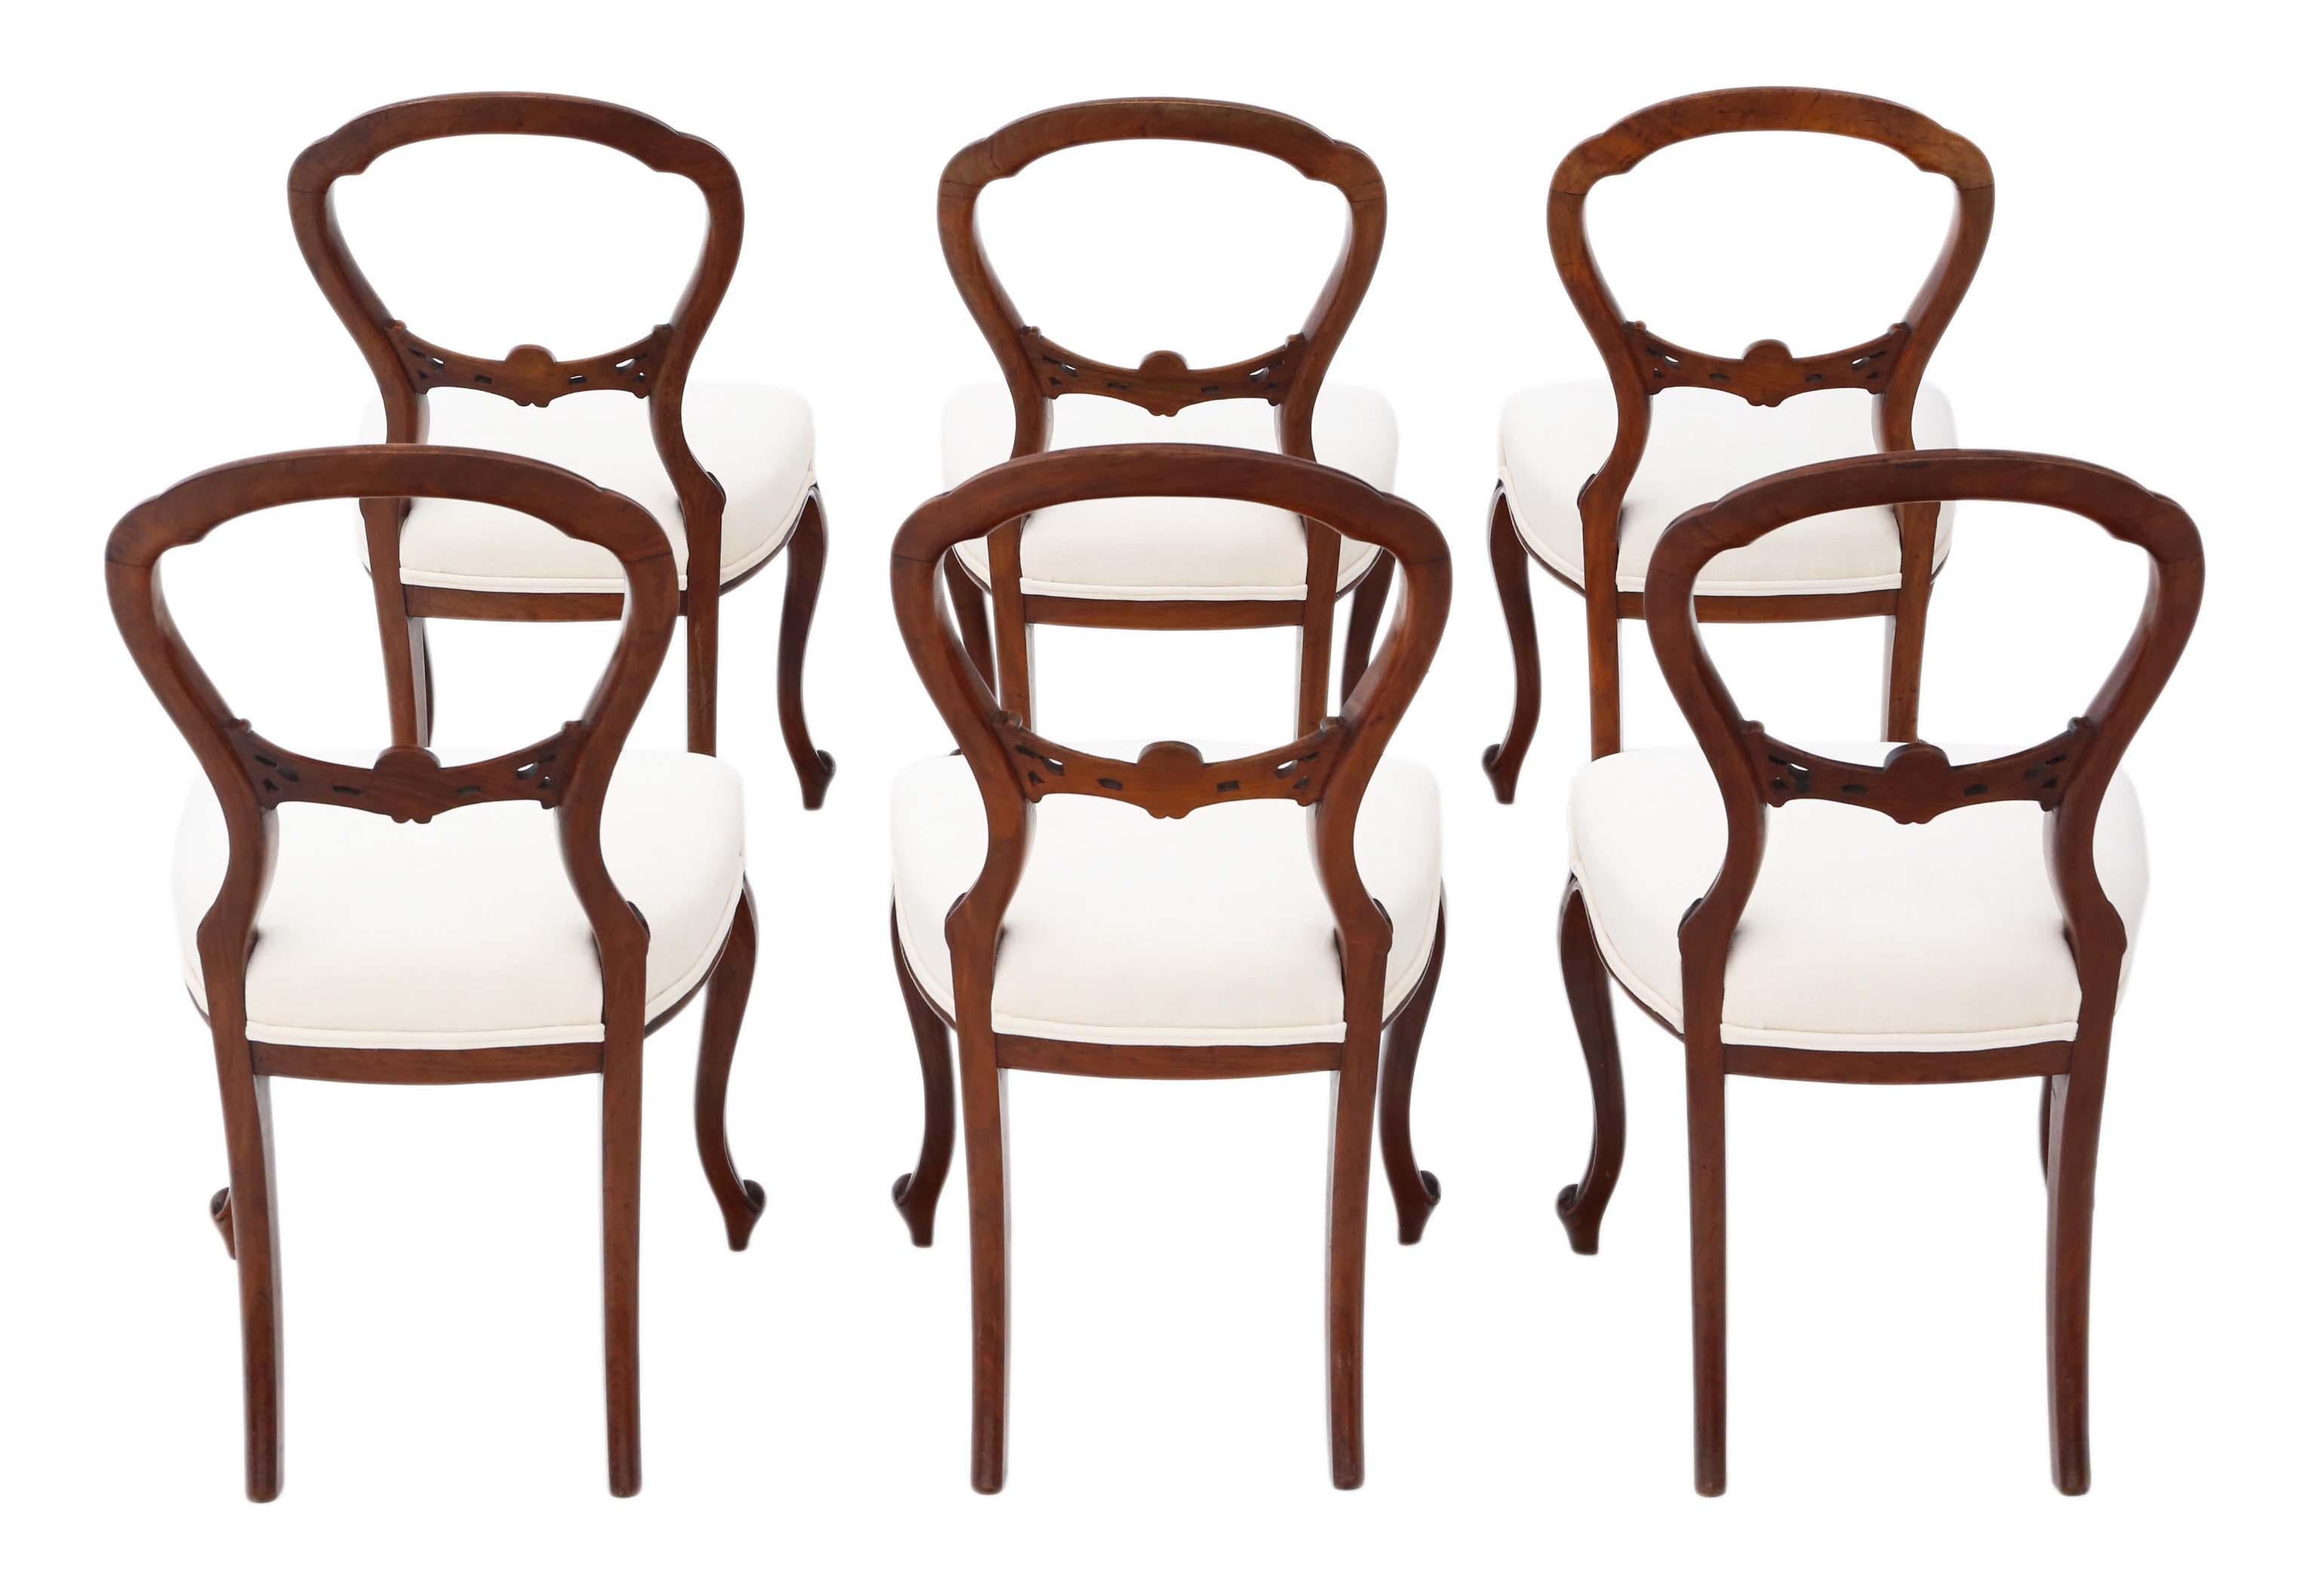 Set of 6 Victorian circa 1870 walnut balloon back dining chairs.
No loose joints. Attractive carved backs and cabriole front legs.
Recent upholstery in a heavy weight upholstery fabric, with an off white colour.
Would look great in the right